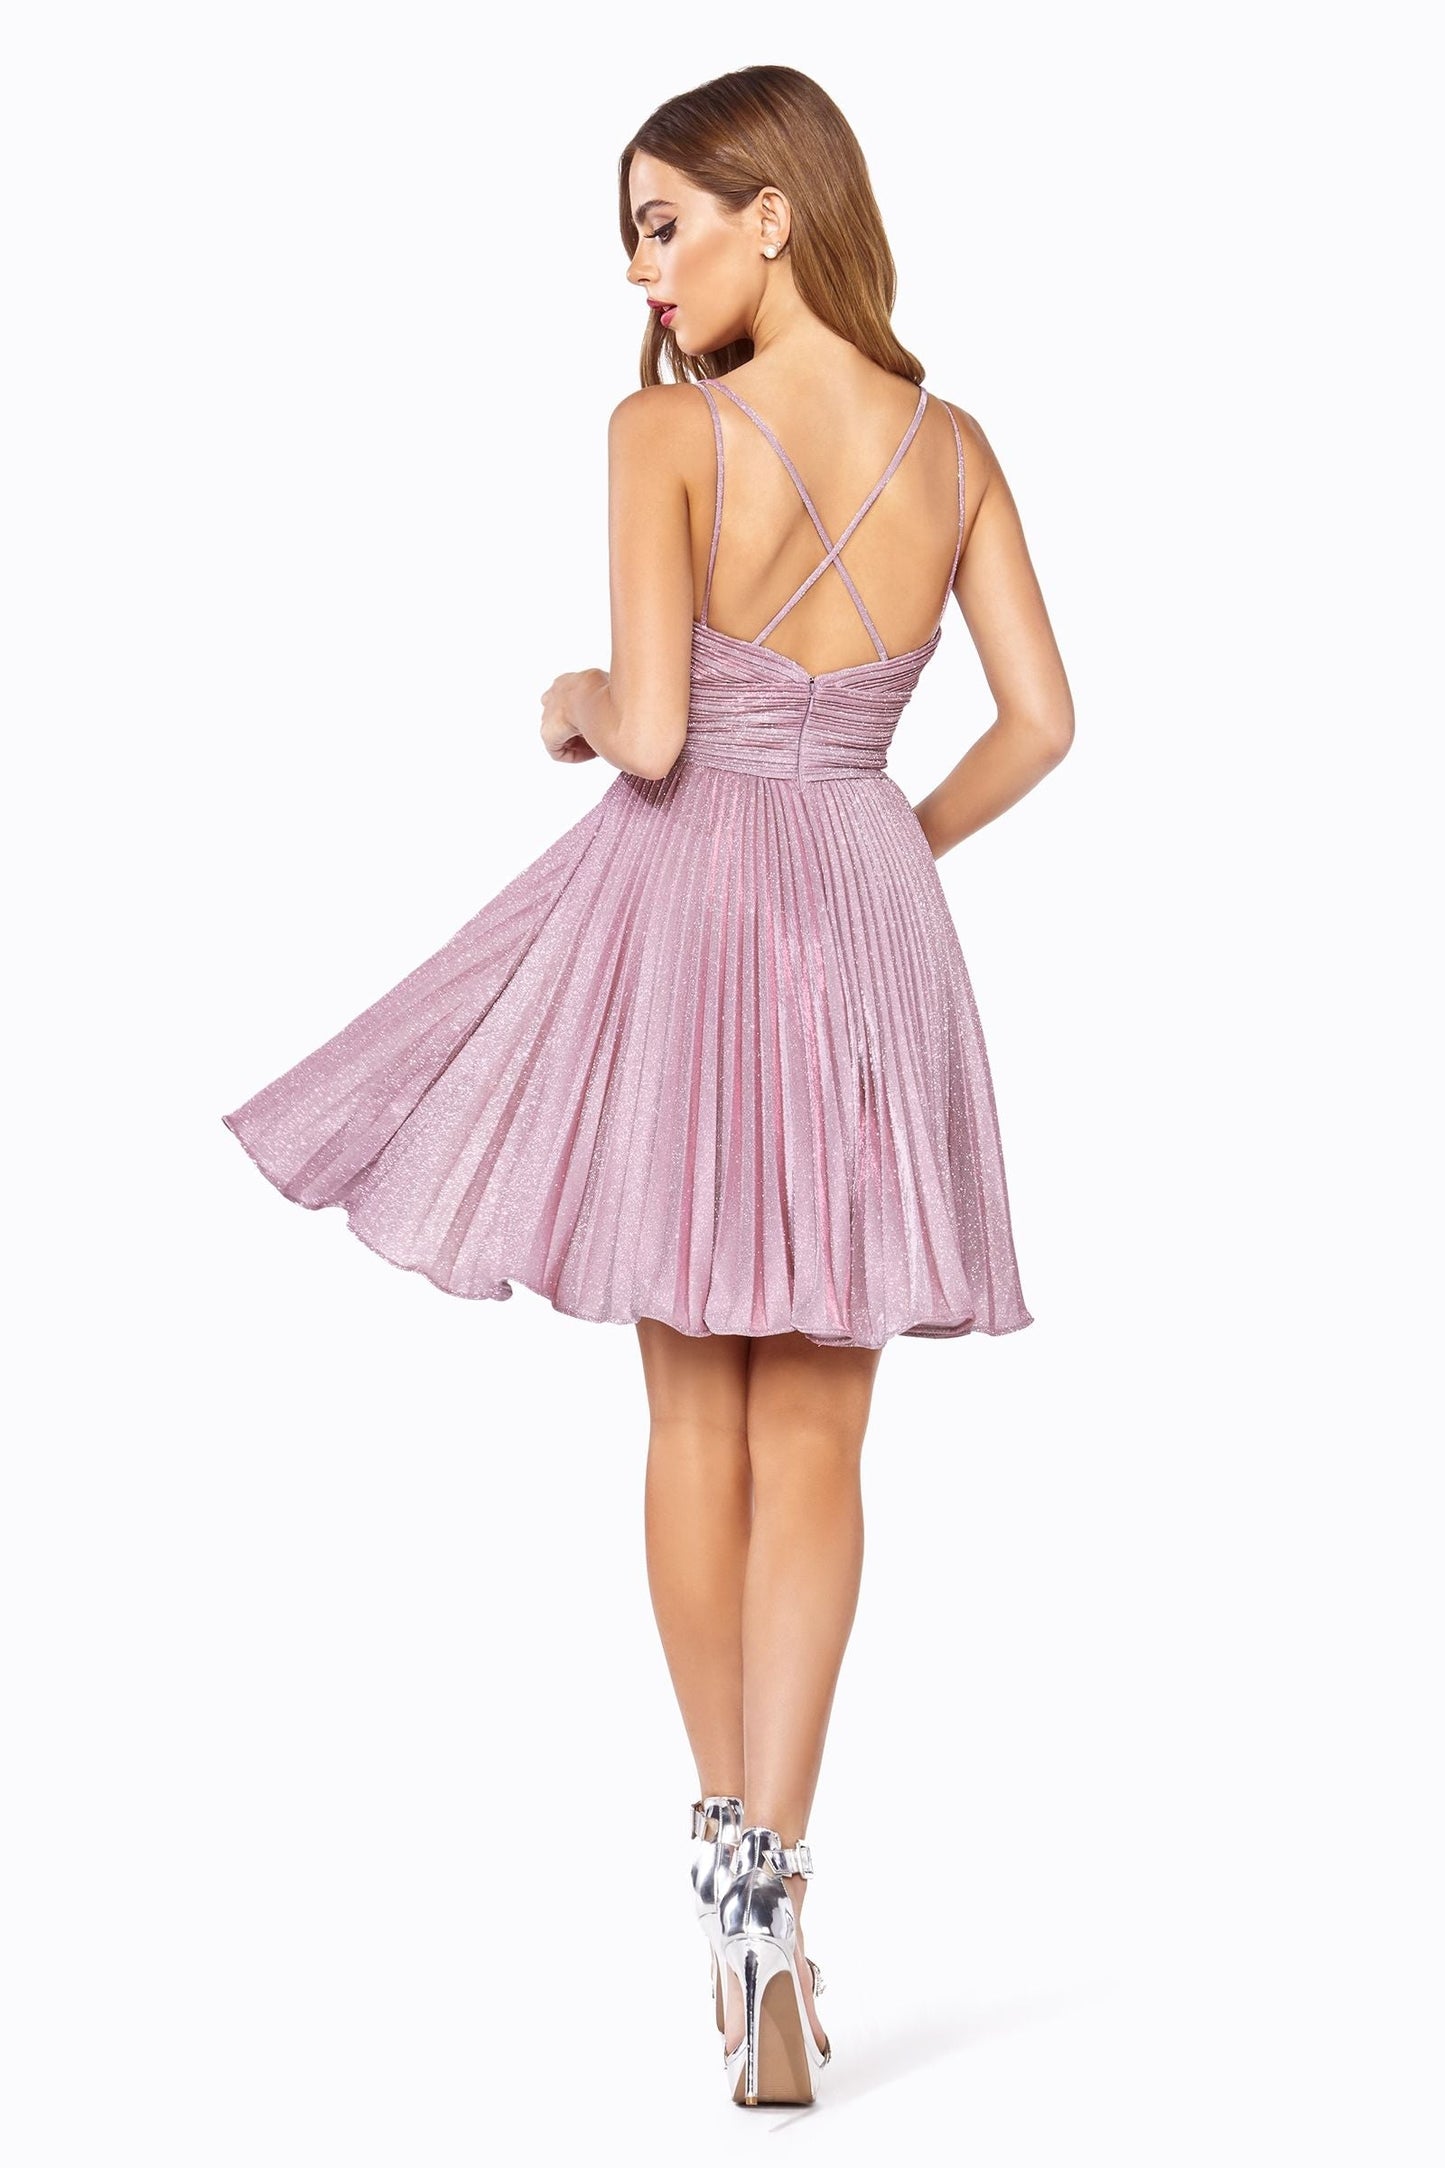 A-Line Short Dress With Pleated Glitter Fabric Details And Criss Cross Back.